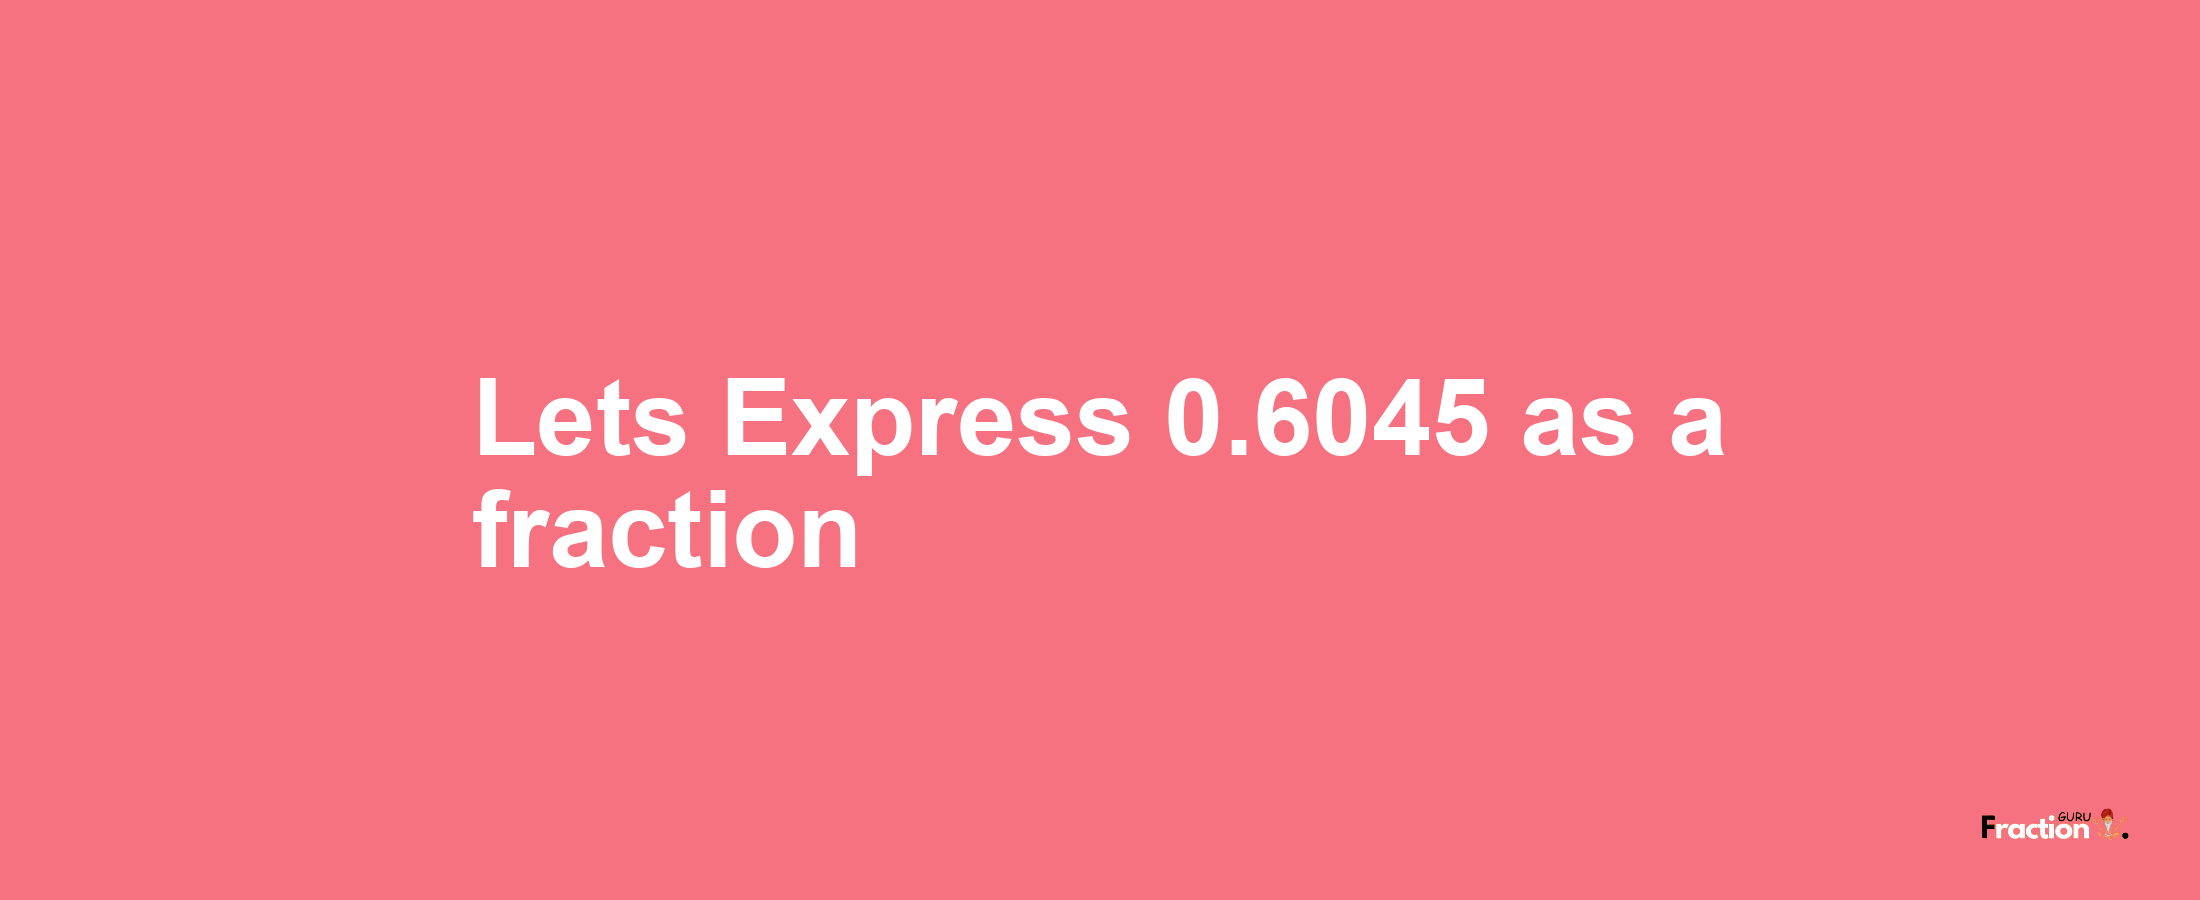 Lets Express 0.6045 as afraction